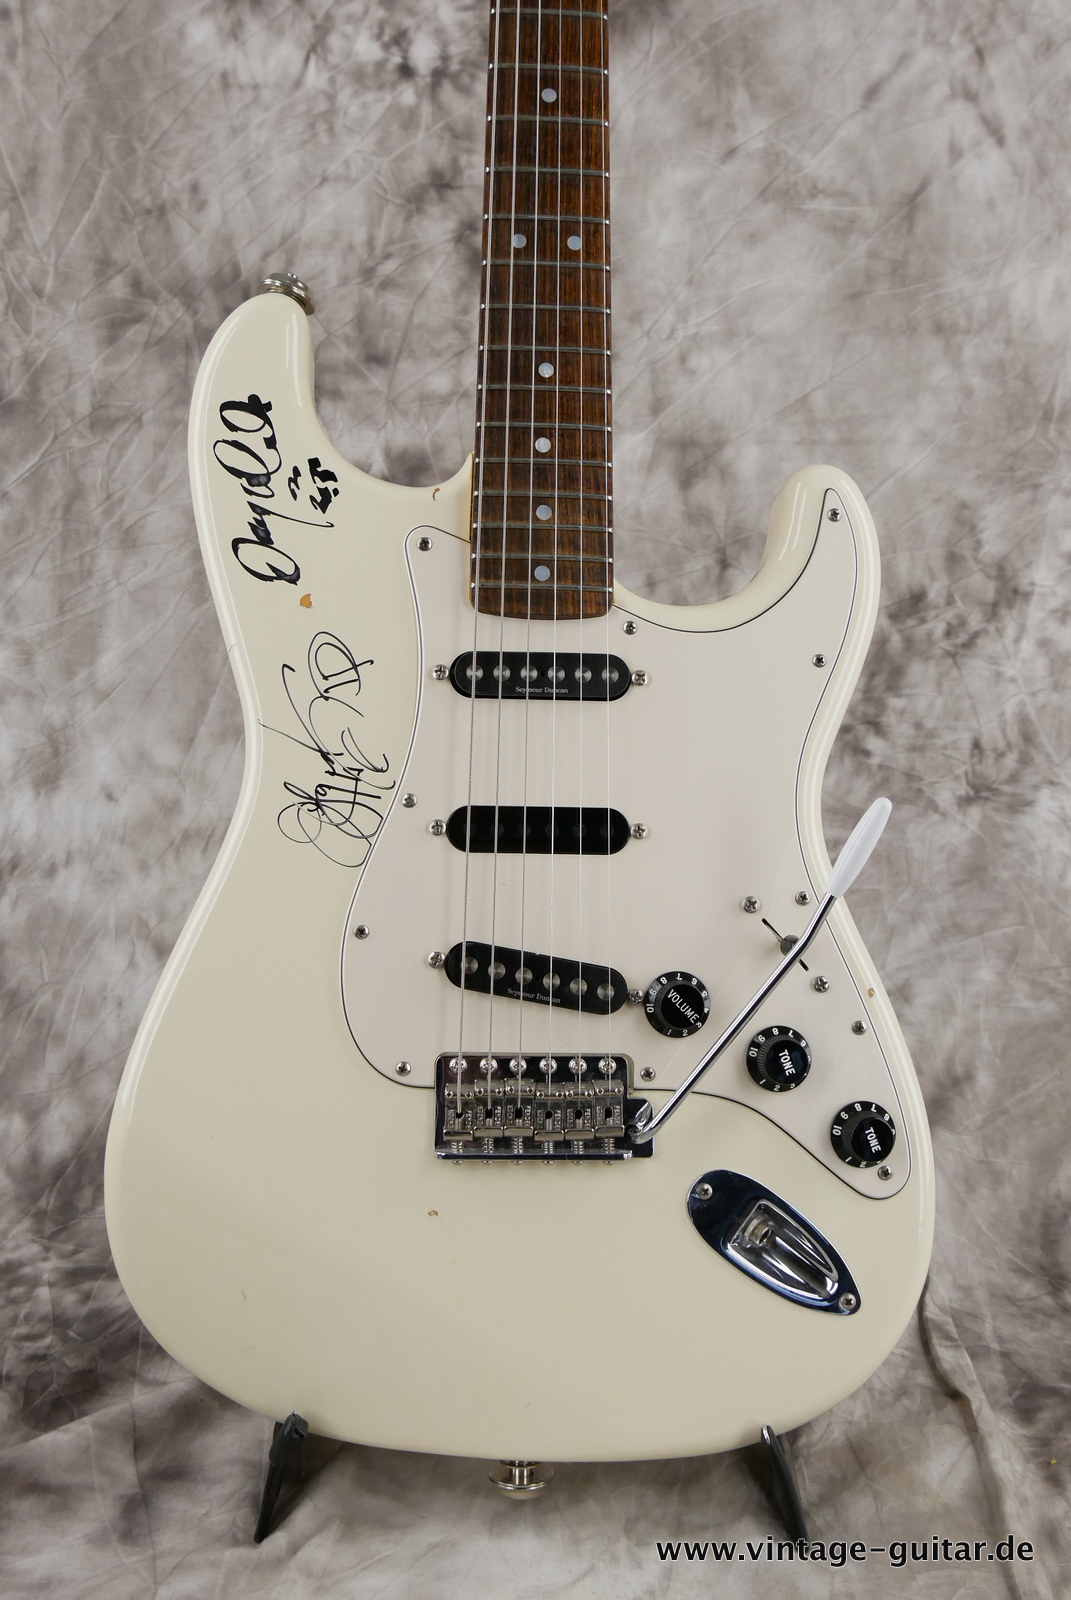 Fender_Strat_Stratocaster_Ritchie_Blackmore_ST-72RB_madeinjapan_1997_olympic_white_singed_scalloped_fretboard-003.JPG